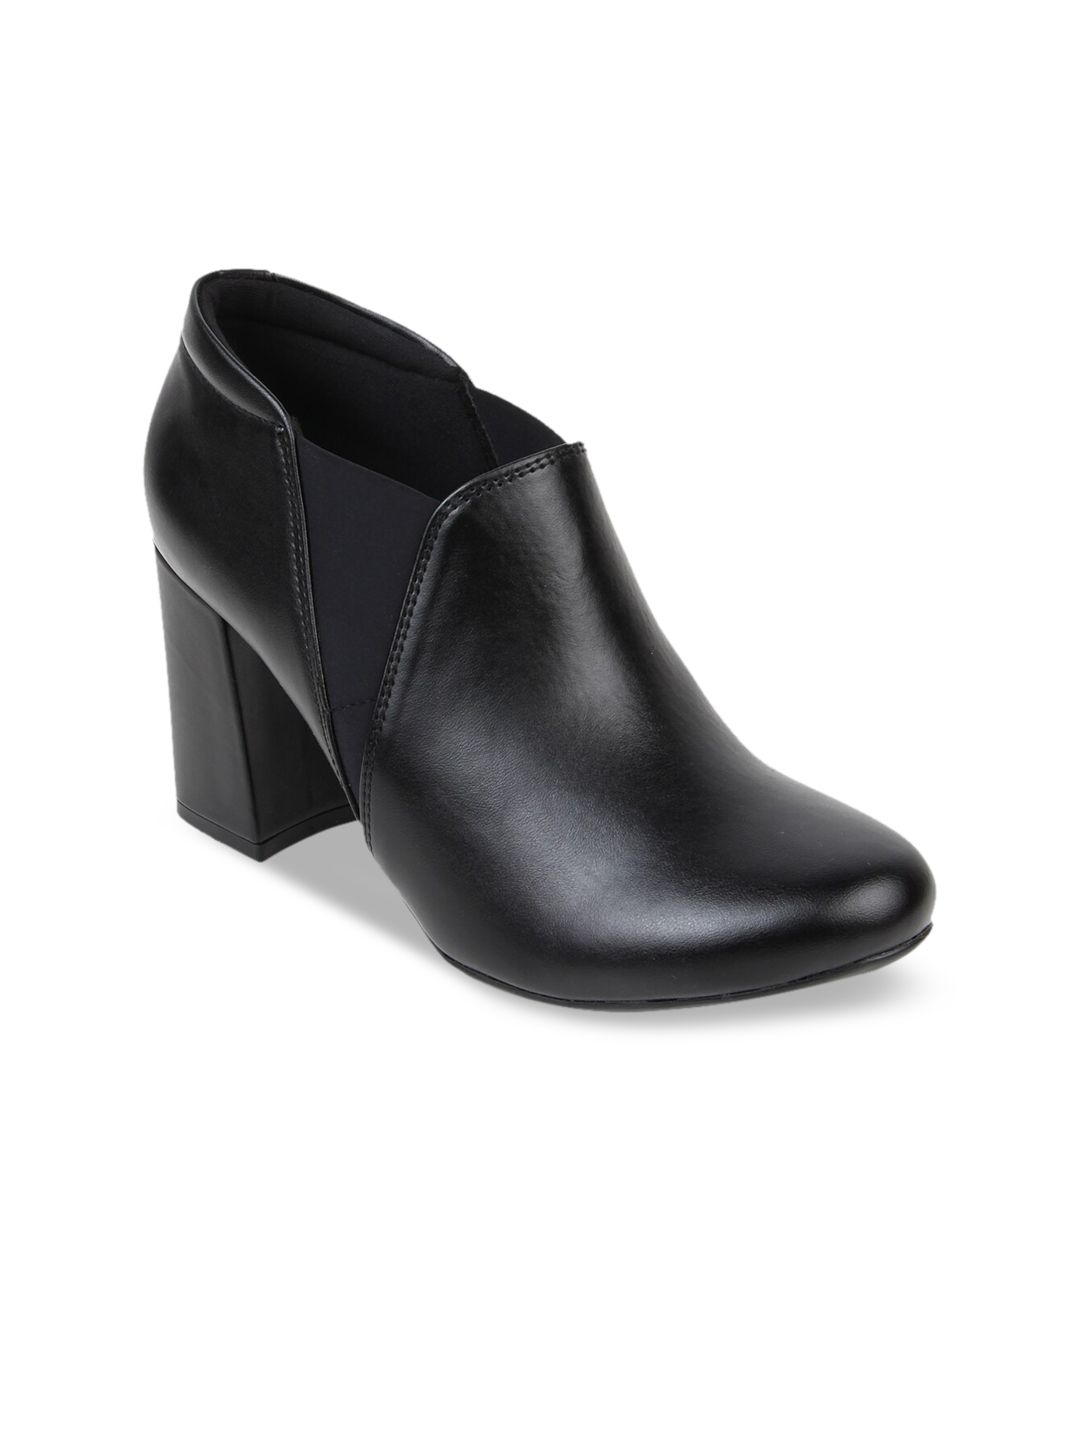 Rocia Women Black Solid Heeled Boots Price in India